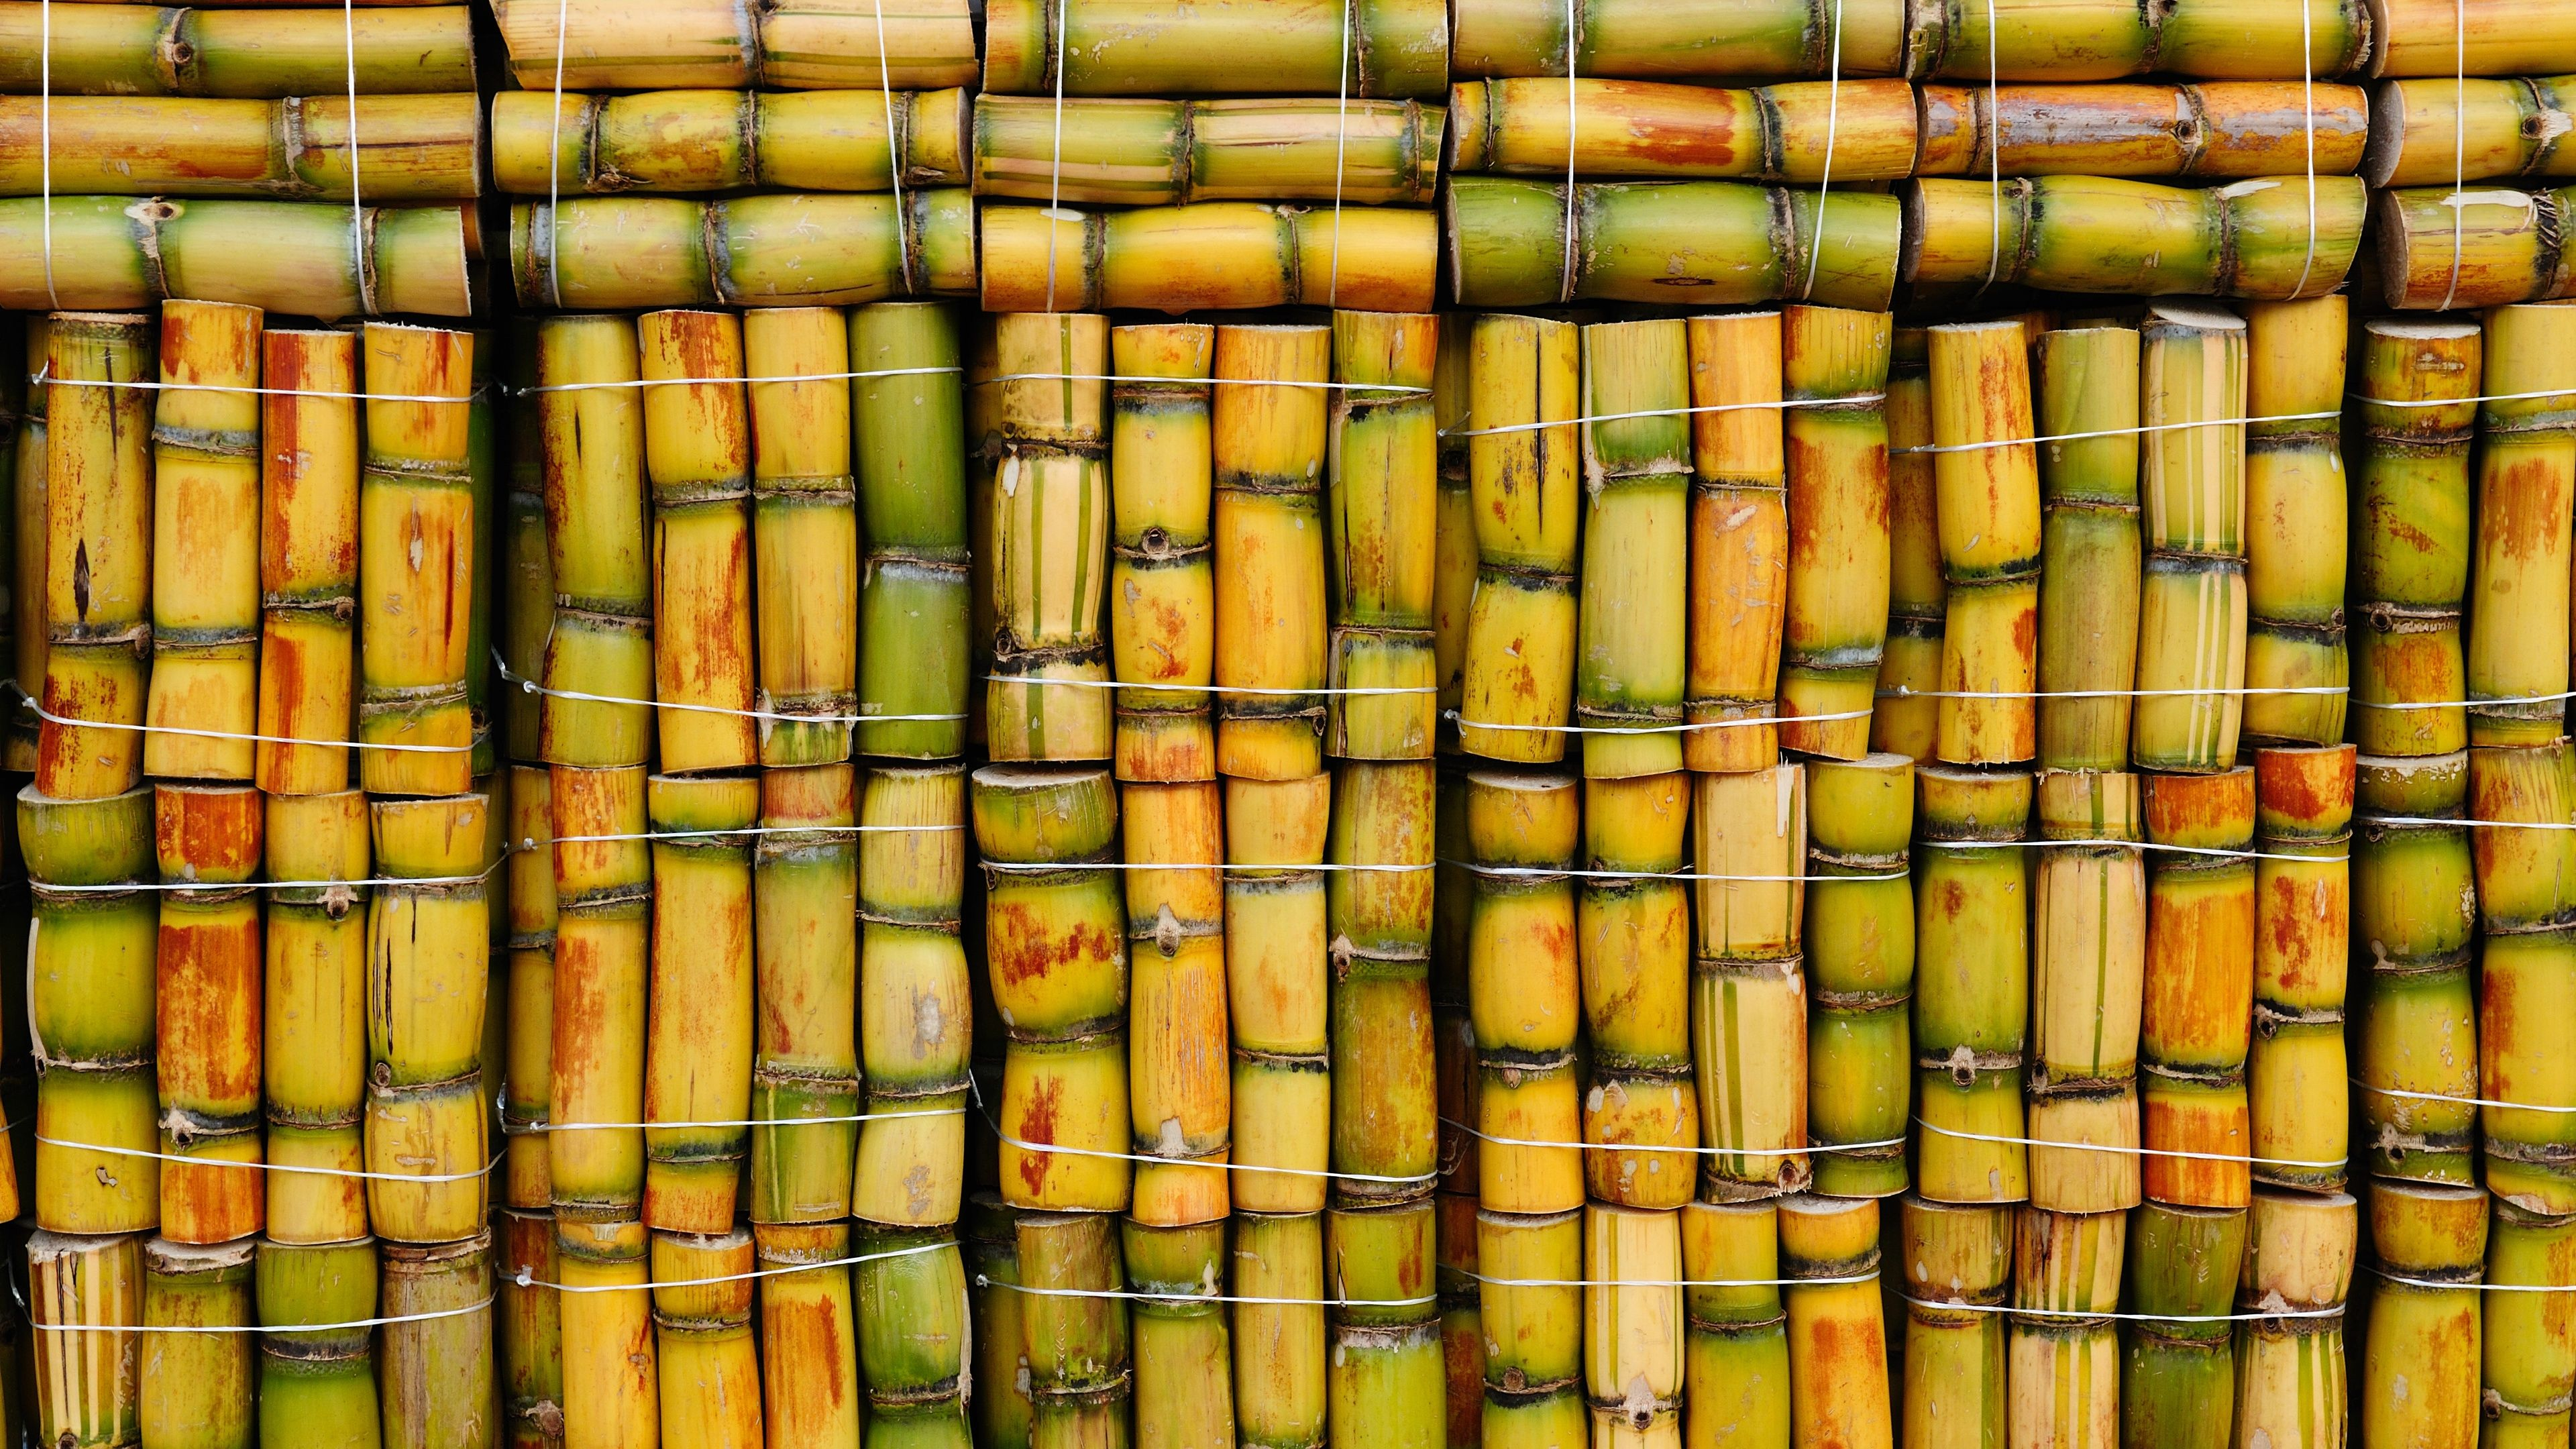 3840x2160 Sugar Cane Wallpapers Top Free Sugar Cane Backgrounds